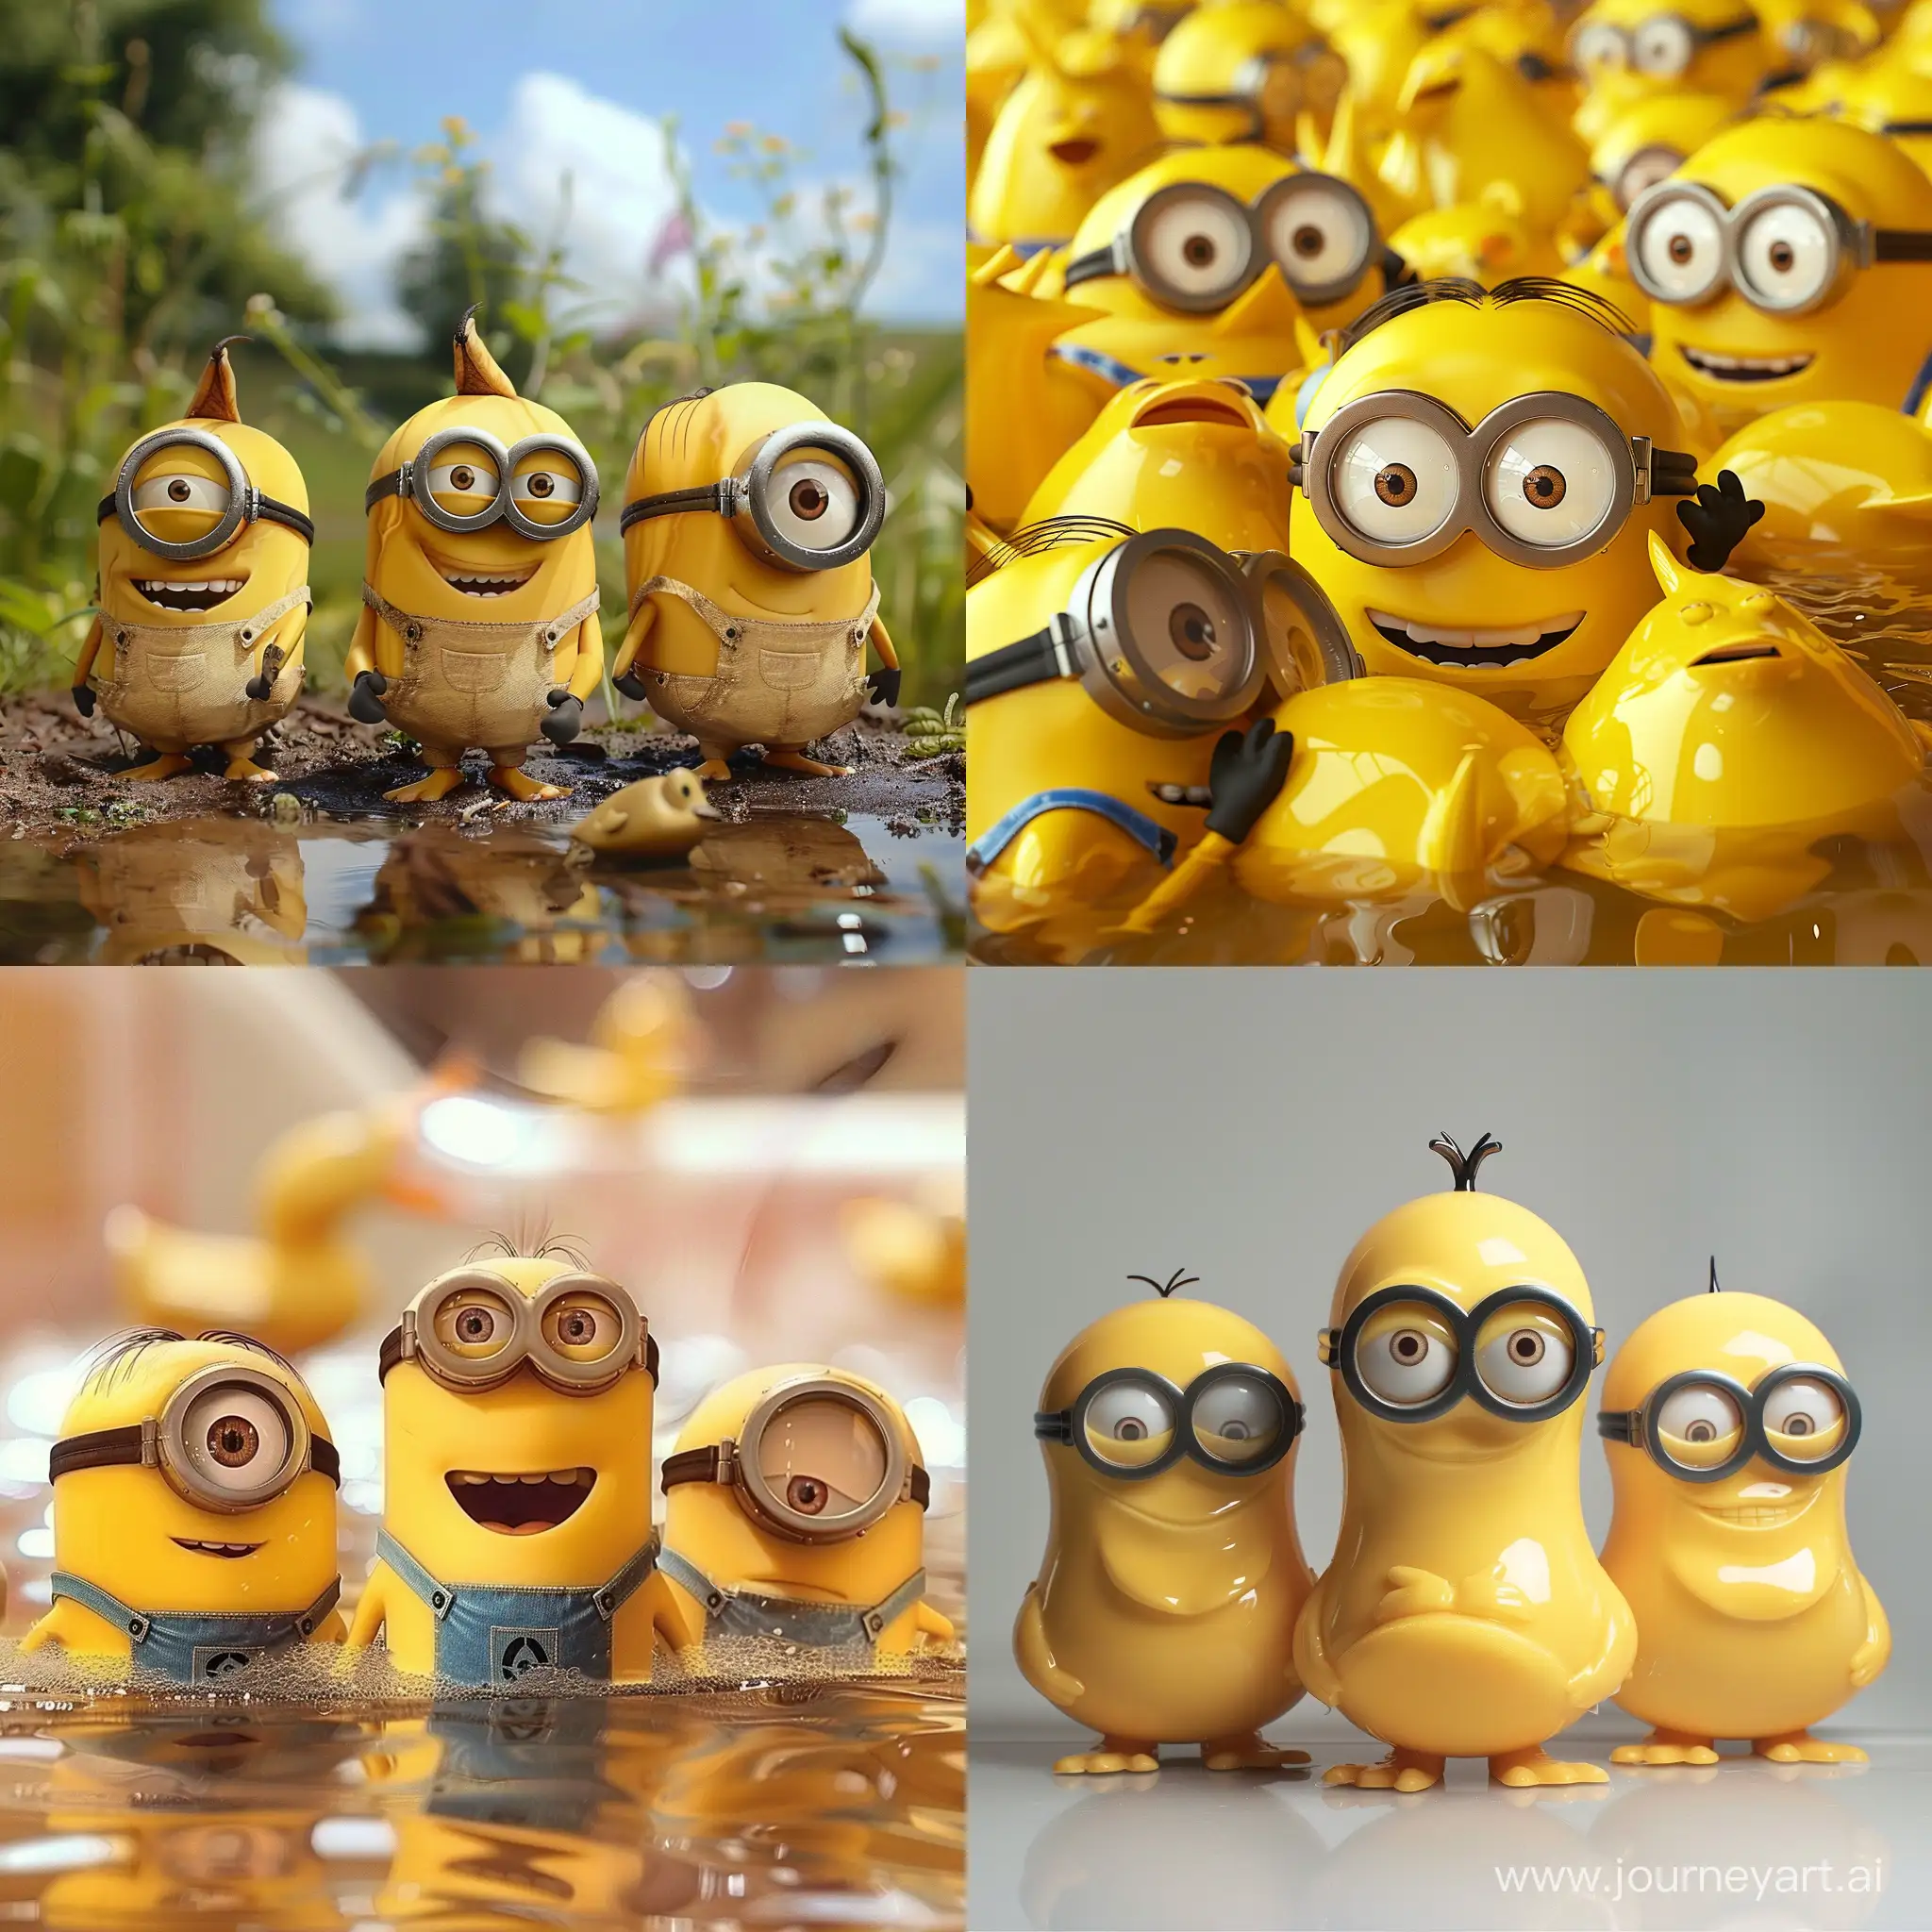 Playful-Minions-and-Ducks-in-Vibrant-Yellow-Harmony